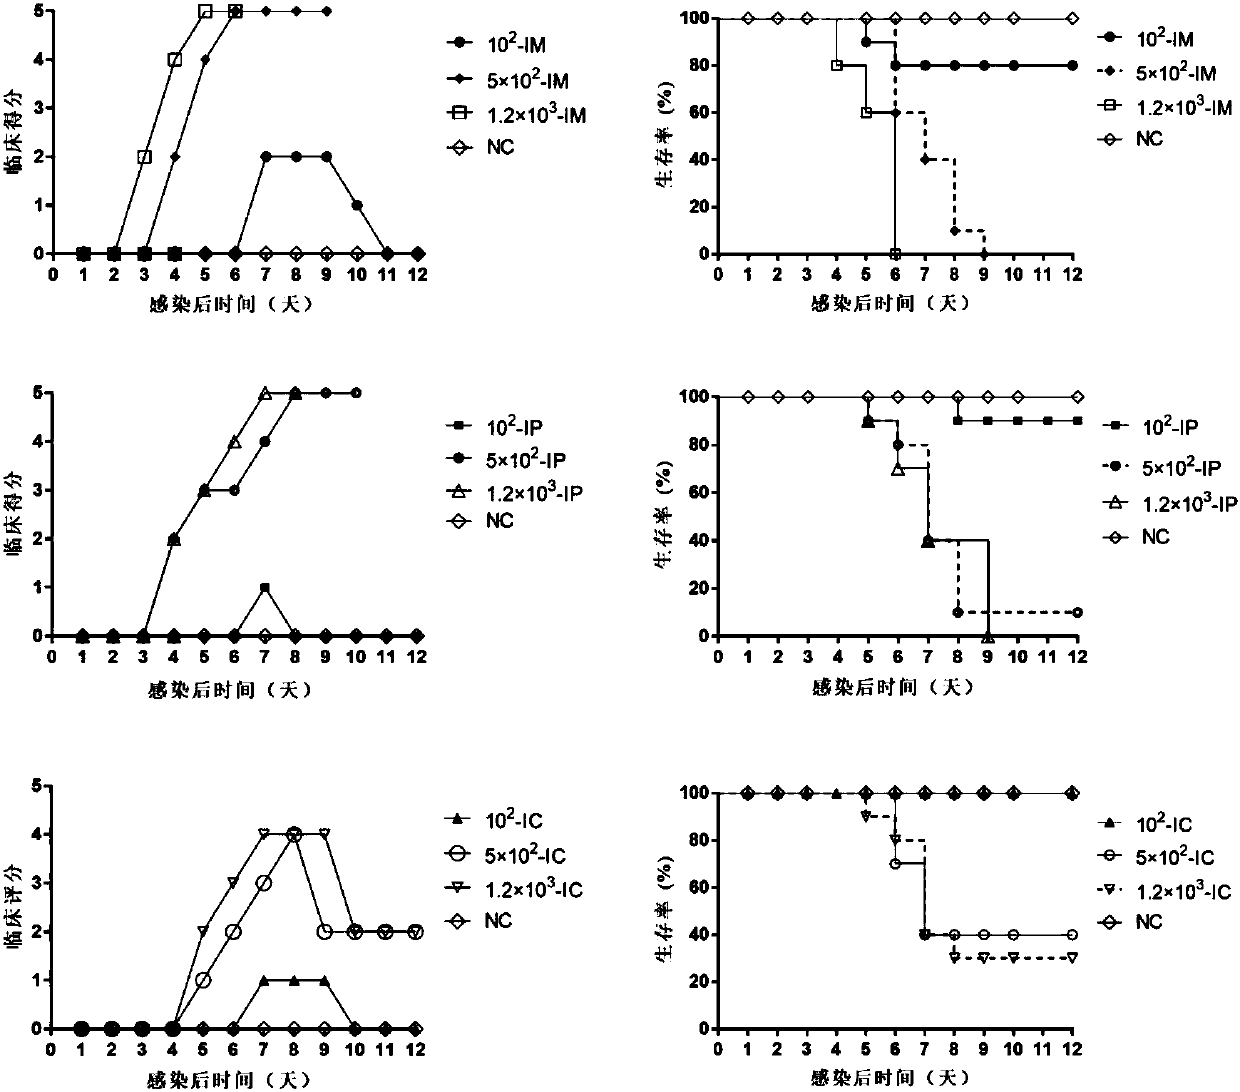 Building and evaluation of an animal model infected with a coxsackievirus A10 domesticated strain TA151R-1